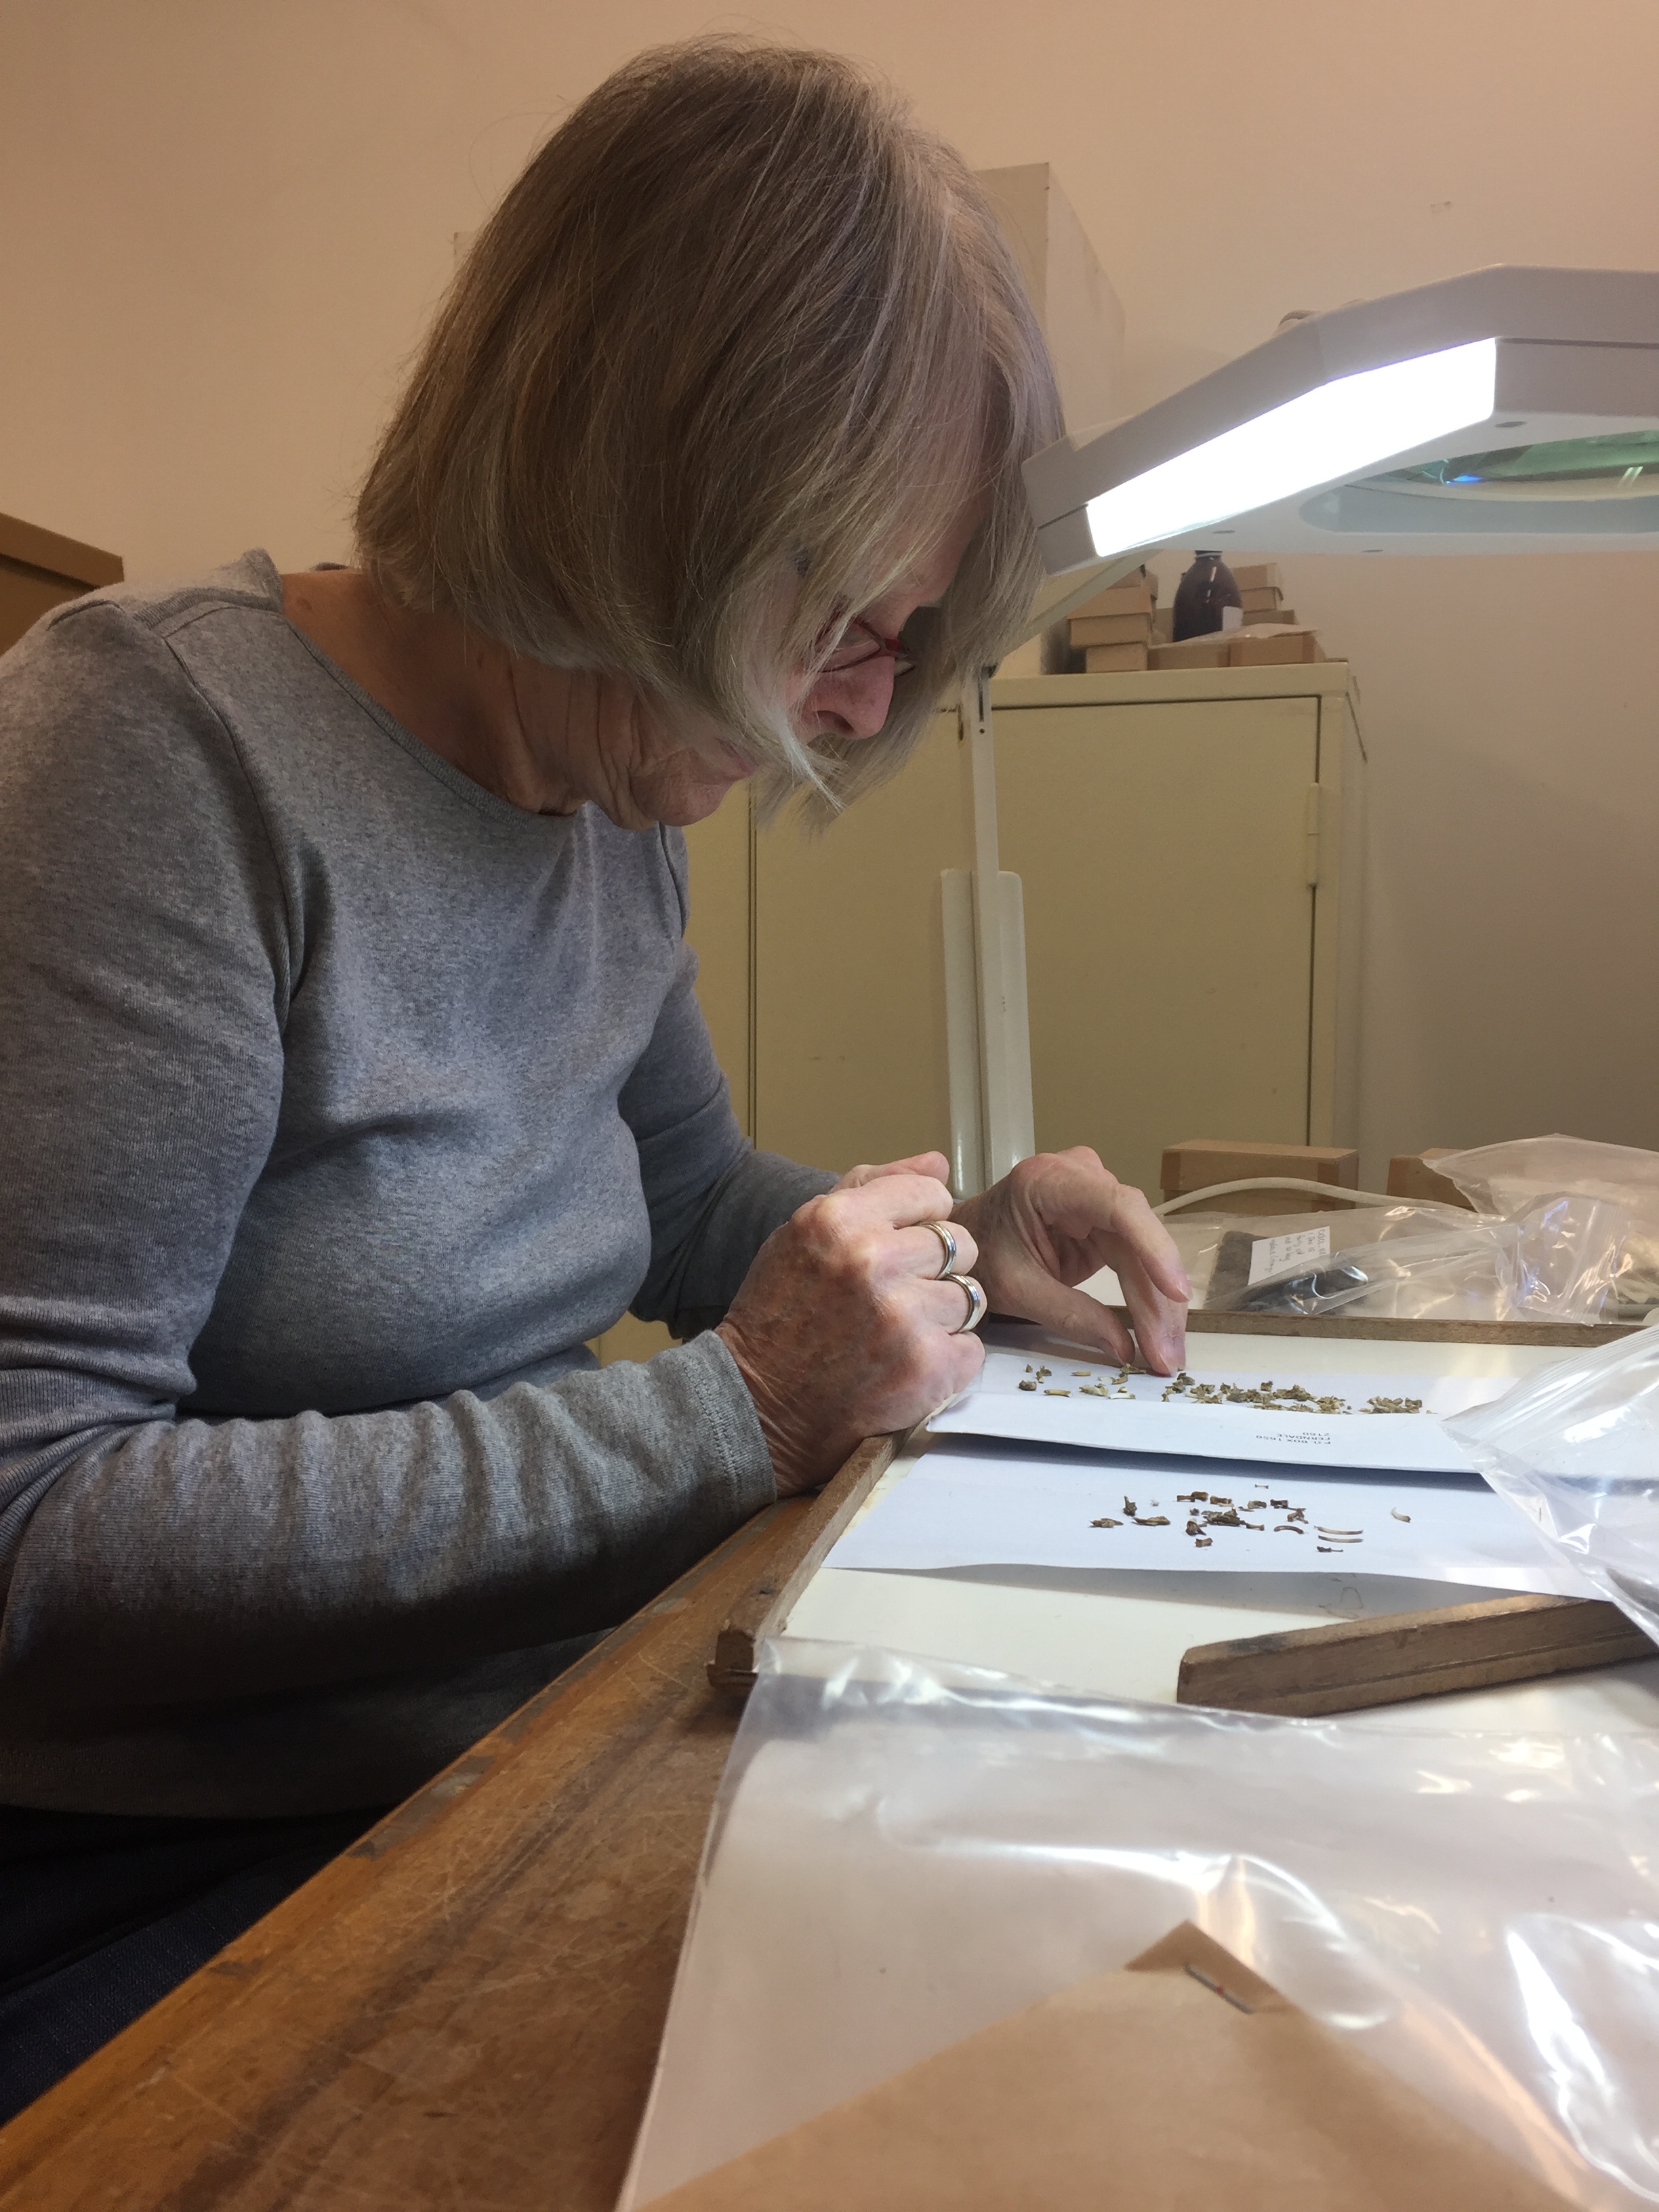 Magaret Avery examines some very small rodent bones and counts the number of individuals between two related samples using left and right-sided bones